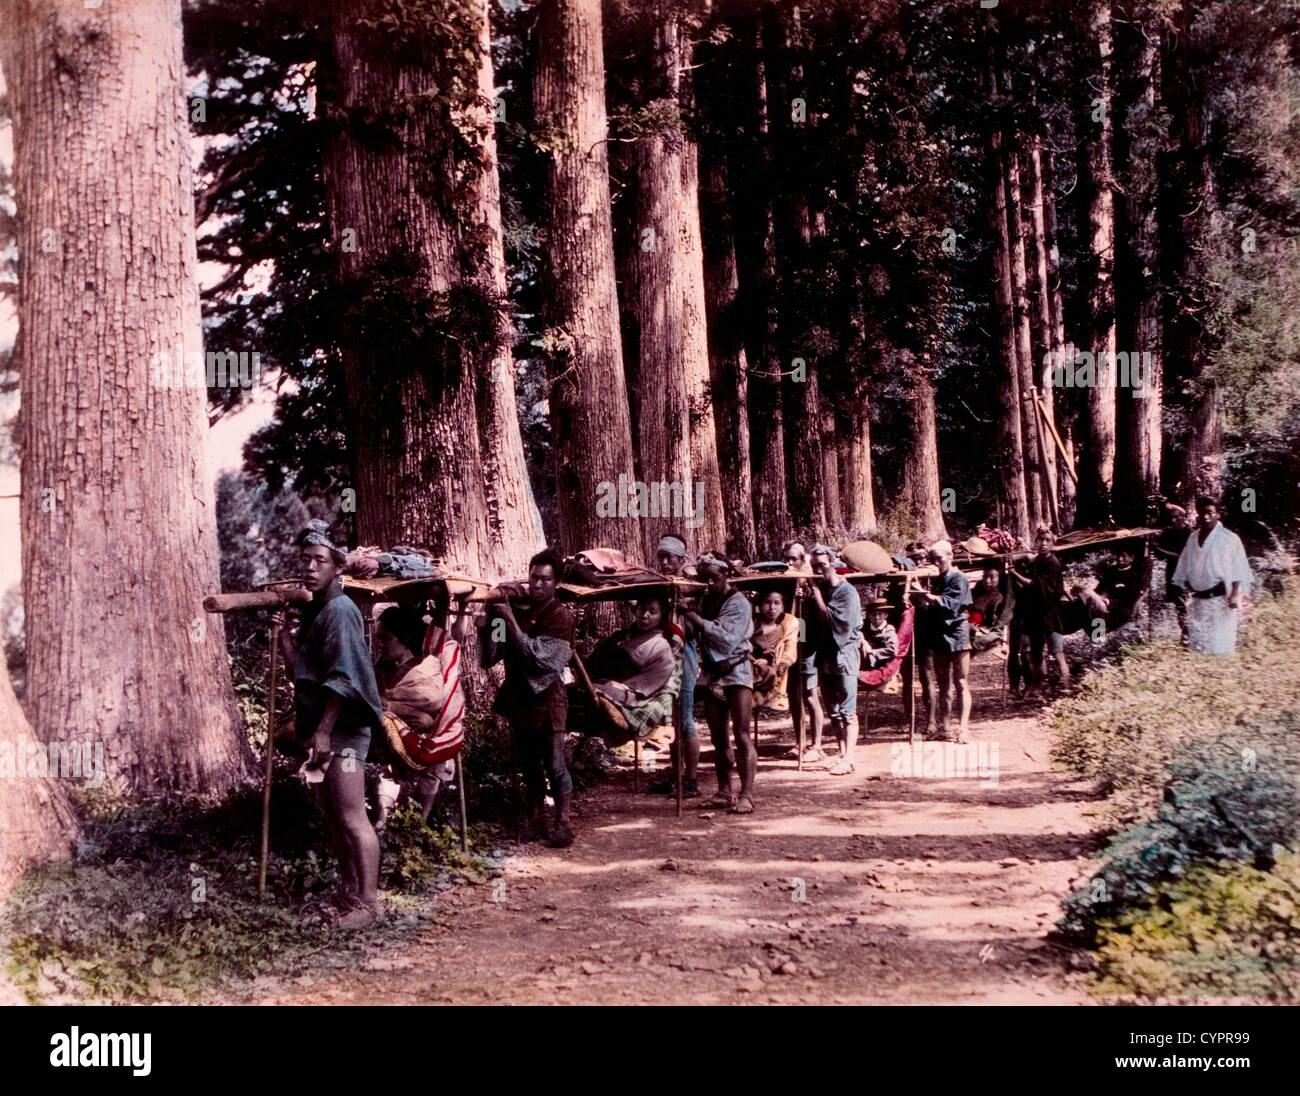 Japanese Men Carrying Japanese Women in Traveling Chairs Along Rural Road, Kusakabe Kimbei, Hand-Colored Photograph, Circa 1870 Stock Photo